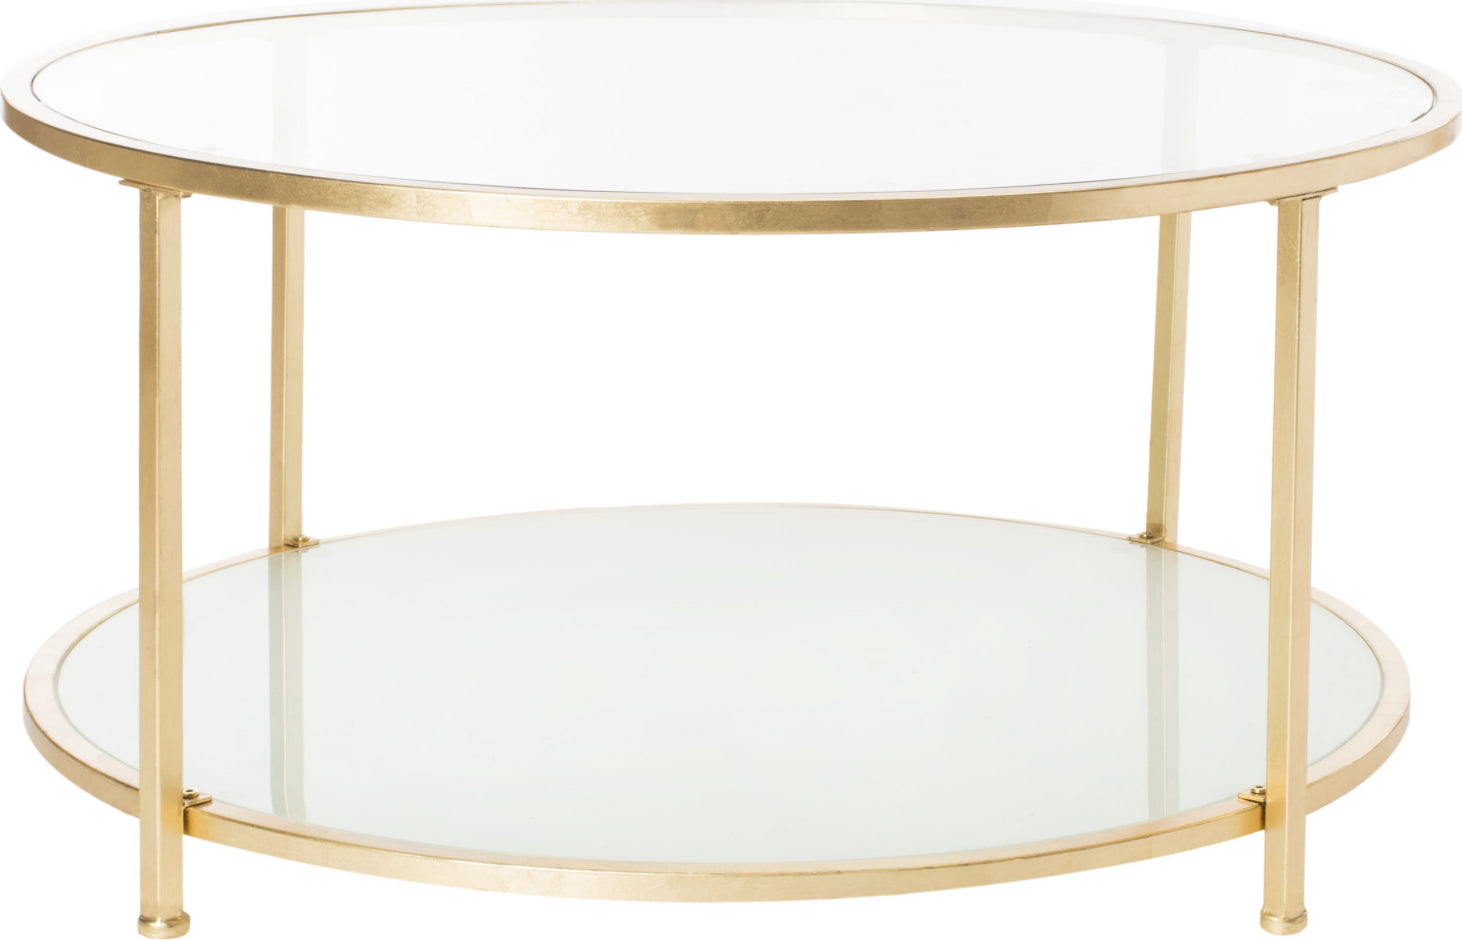 Safavieh Ivy 2 Tier Round Coffee Table Gold Furniture main image